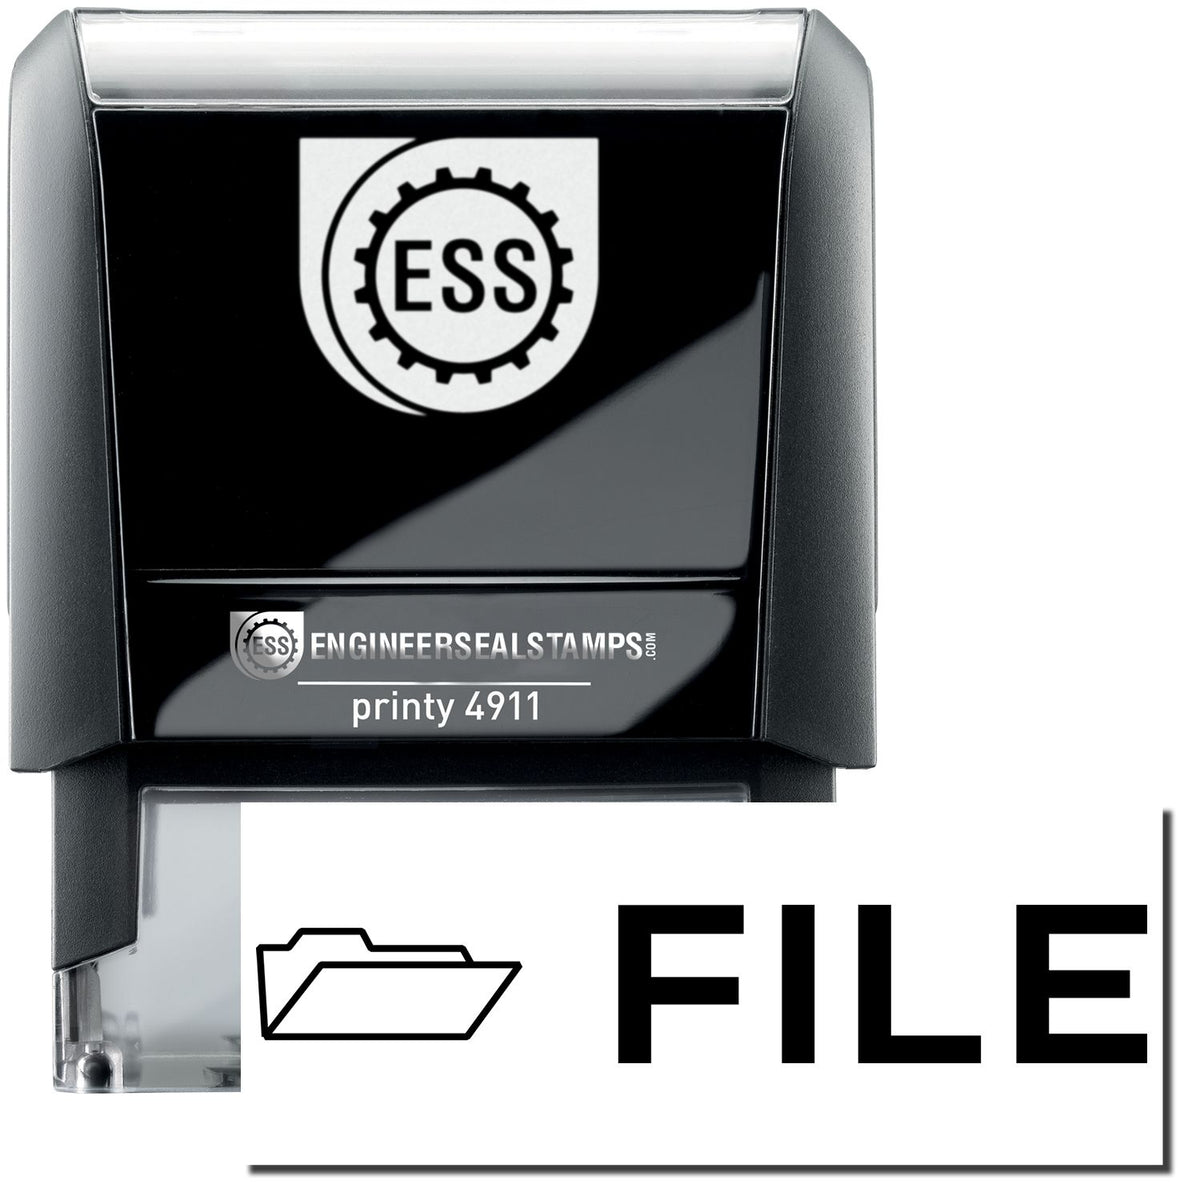 A self-inking stamp with a stamped image showing how the text &quot;FILE&quot; in a bold font and a small icon of a file folder on the left is displayed after stamping.